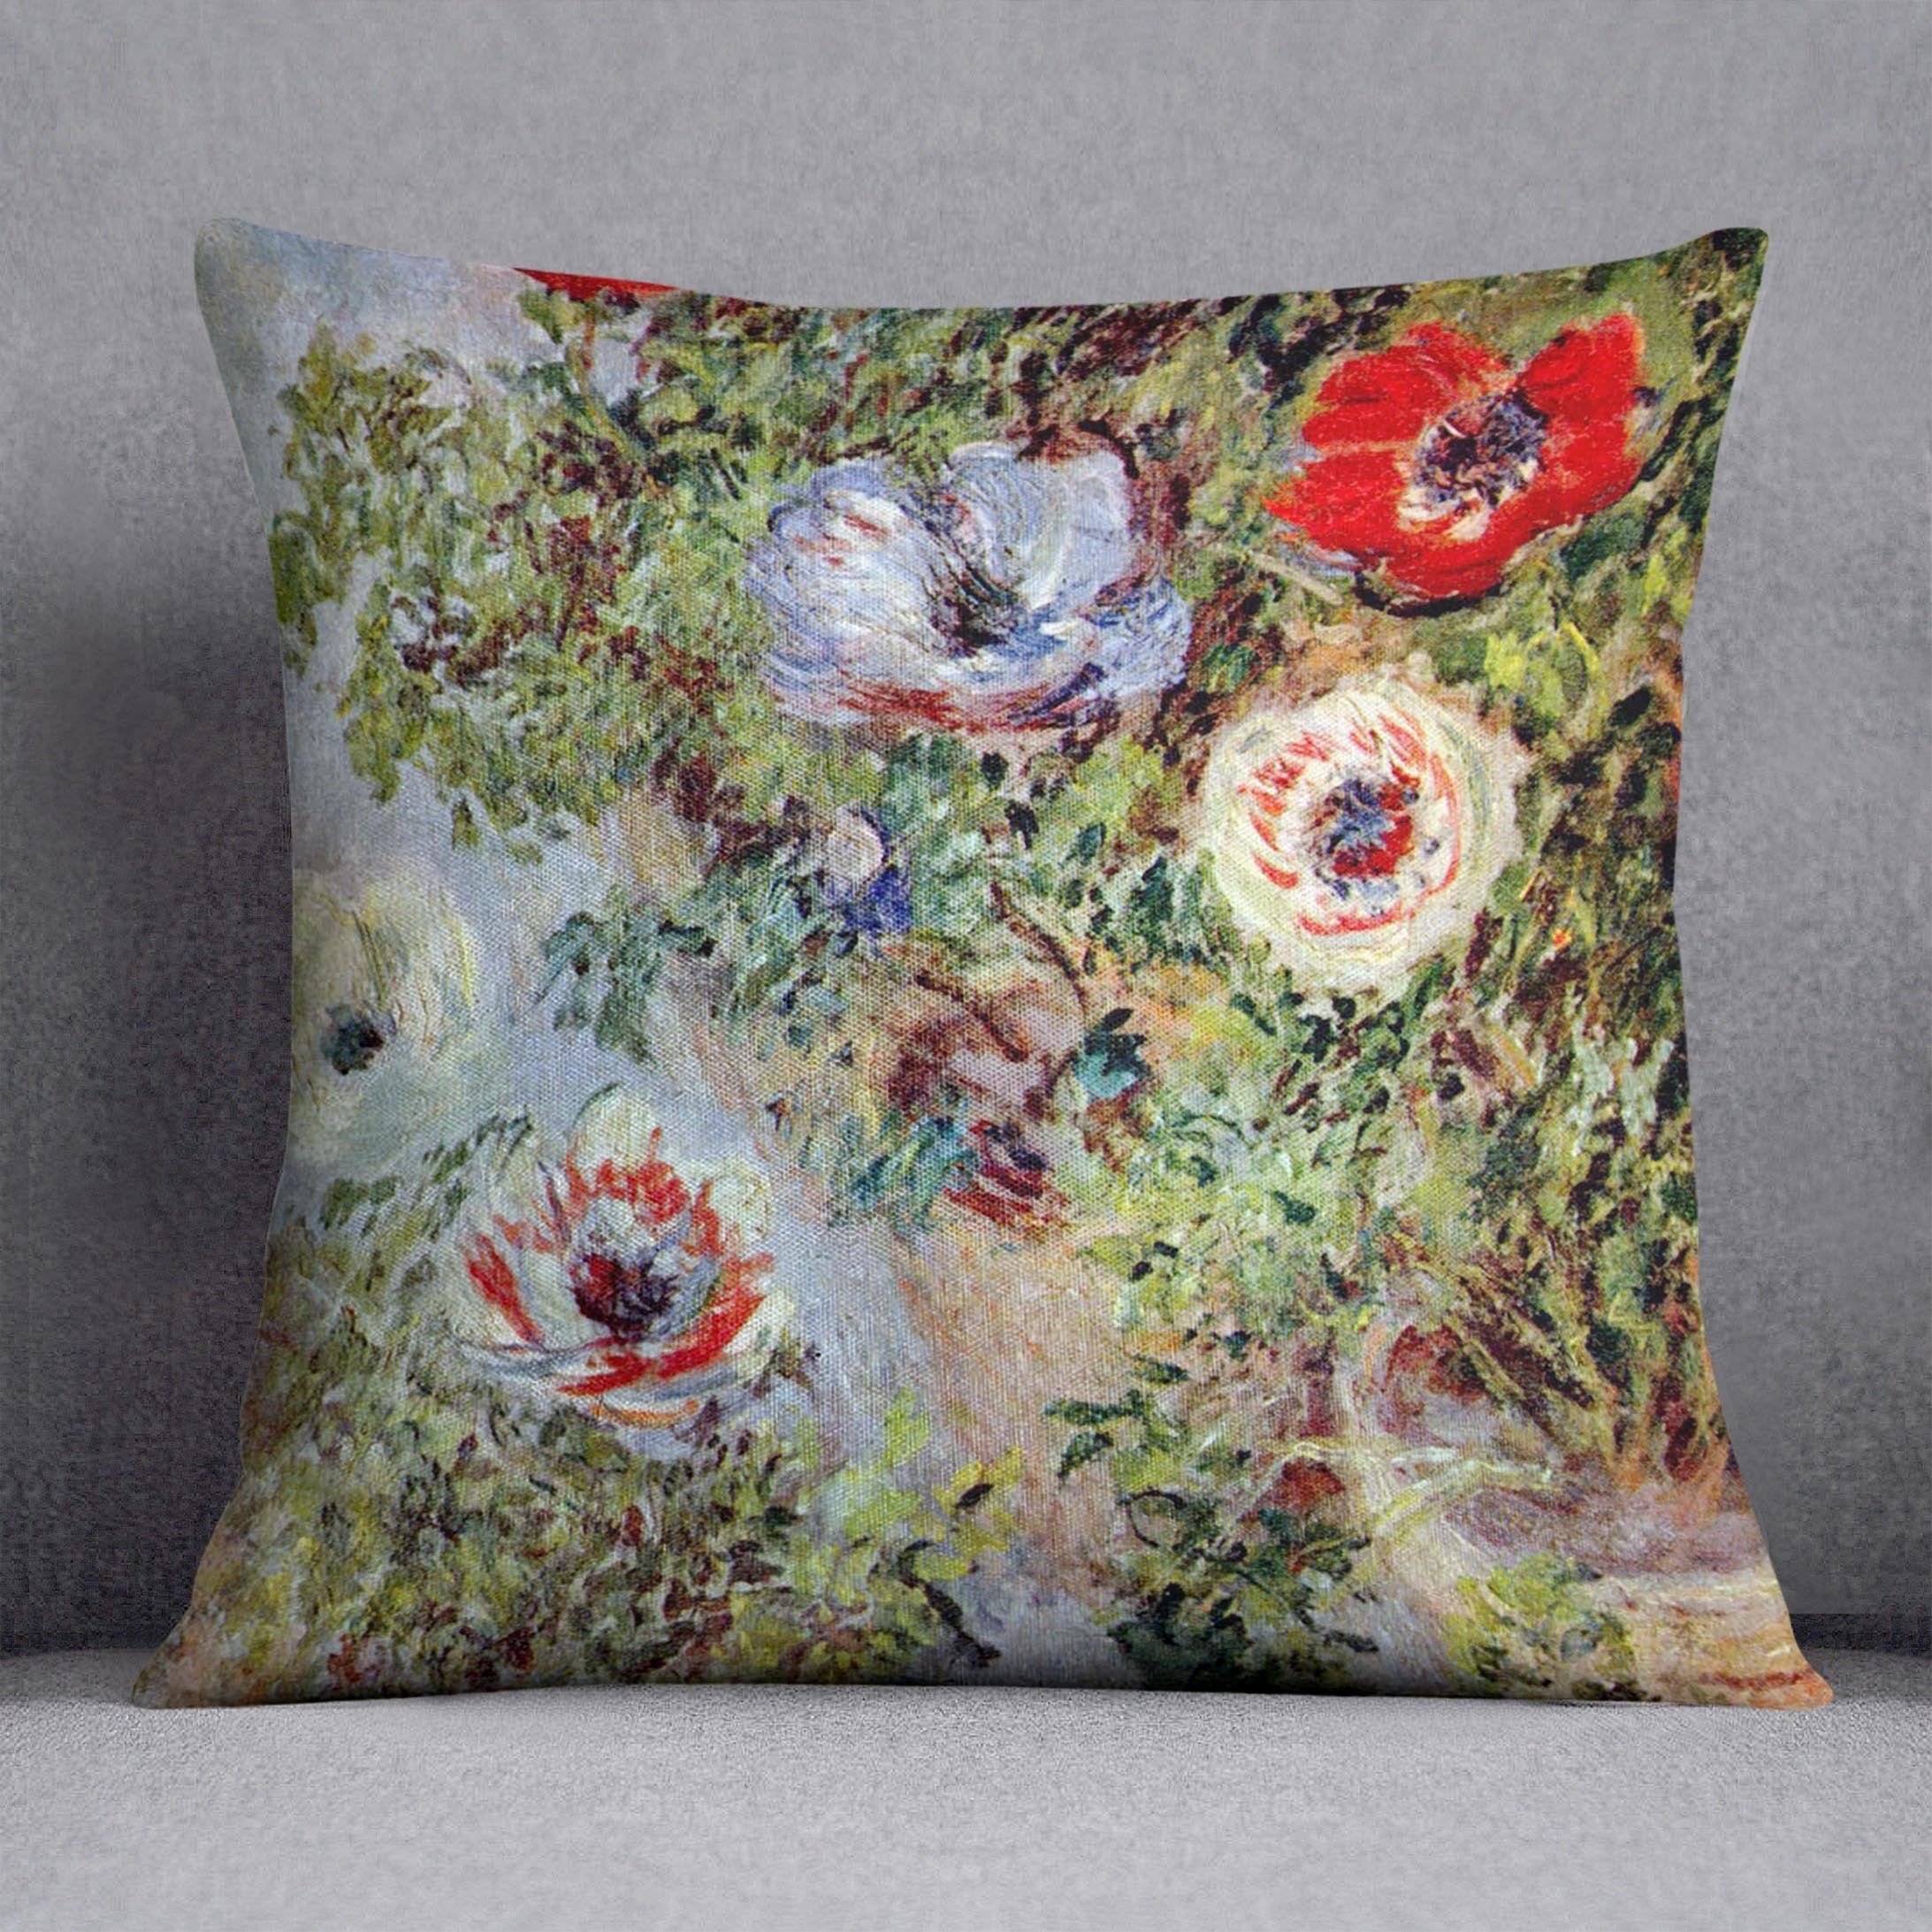 Still Life with Anemones by Monet Throw Pillow